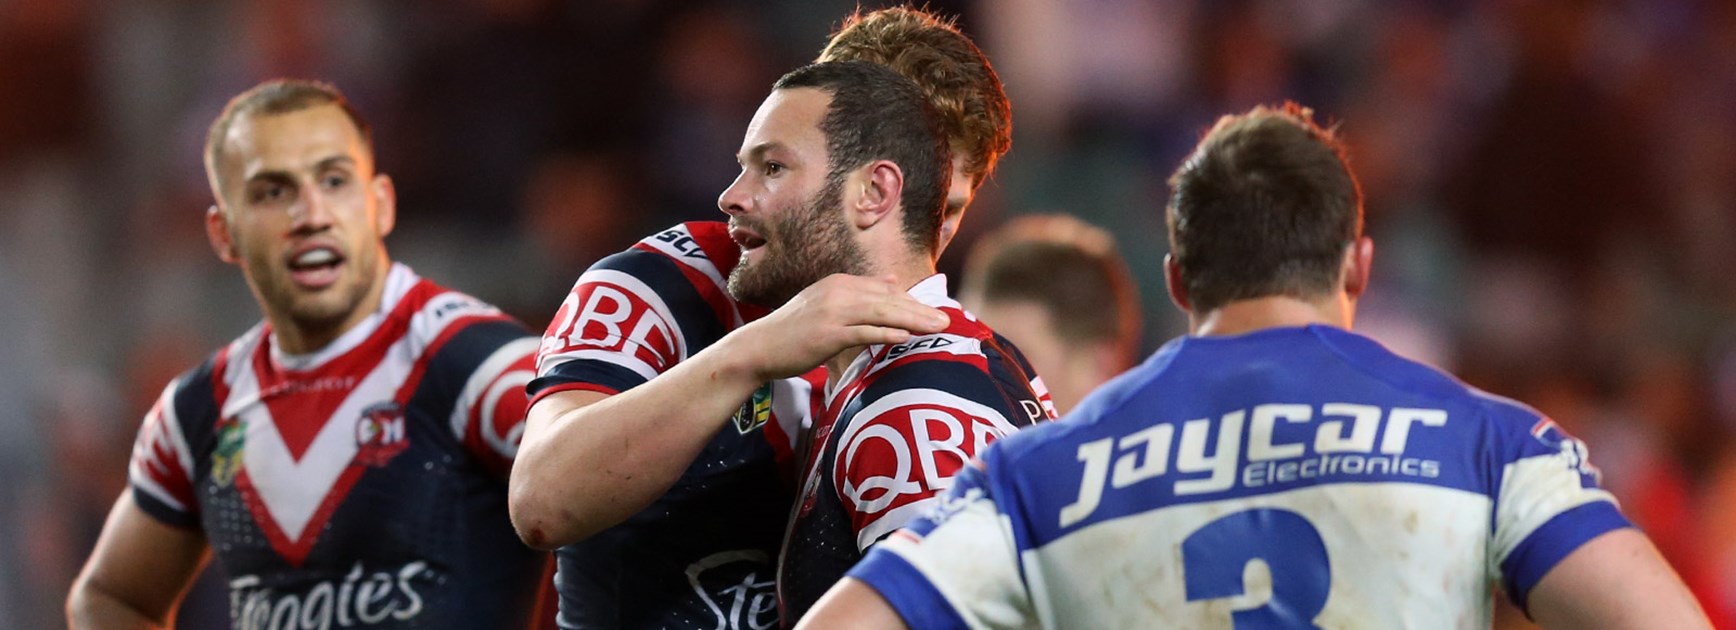 Boyd Cordner scored a try in the Roosters' semi-final win over the Bulldogs.